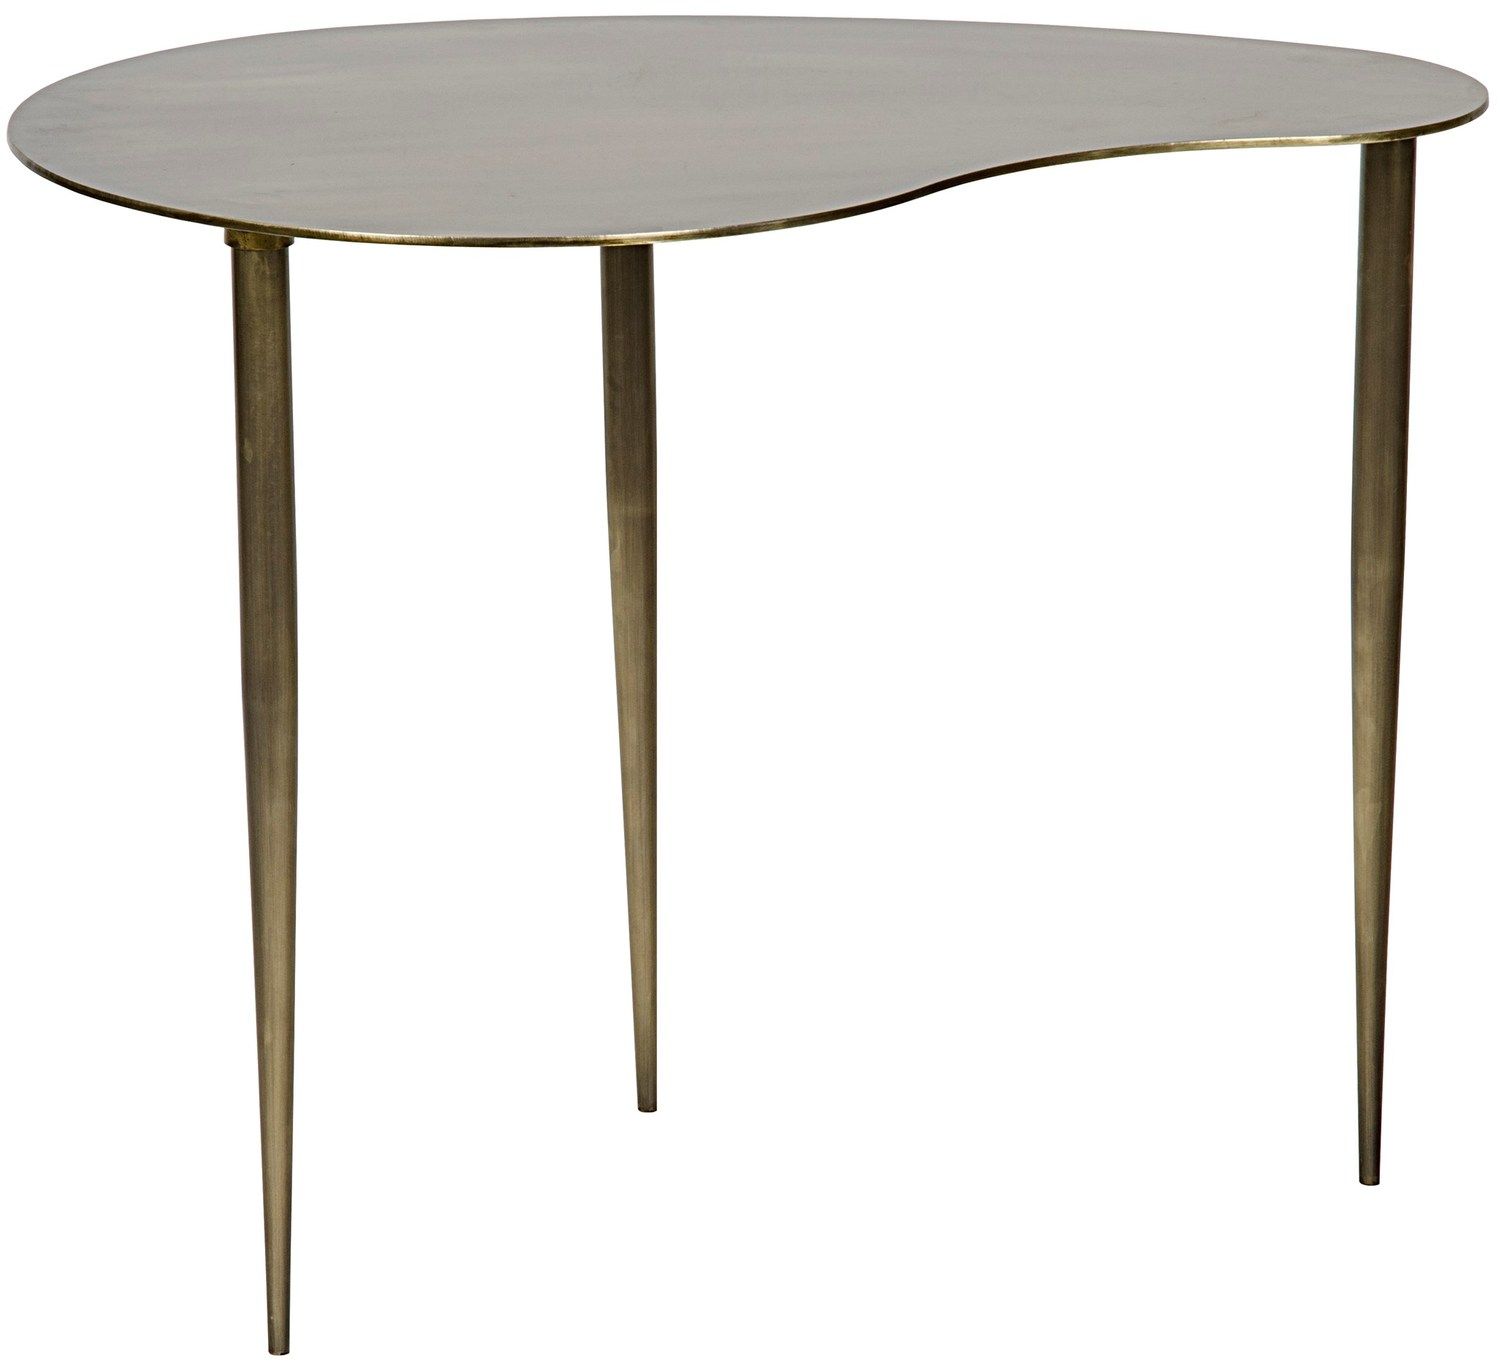 boutique design accent table commercial claremont interior firm specializing high end residential and interiors rustic target round pottery barn flower oval glass top coffee patio